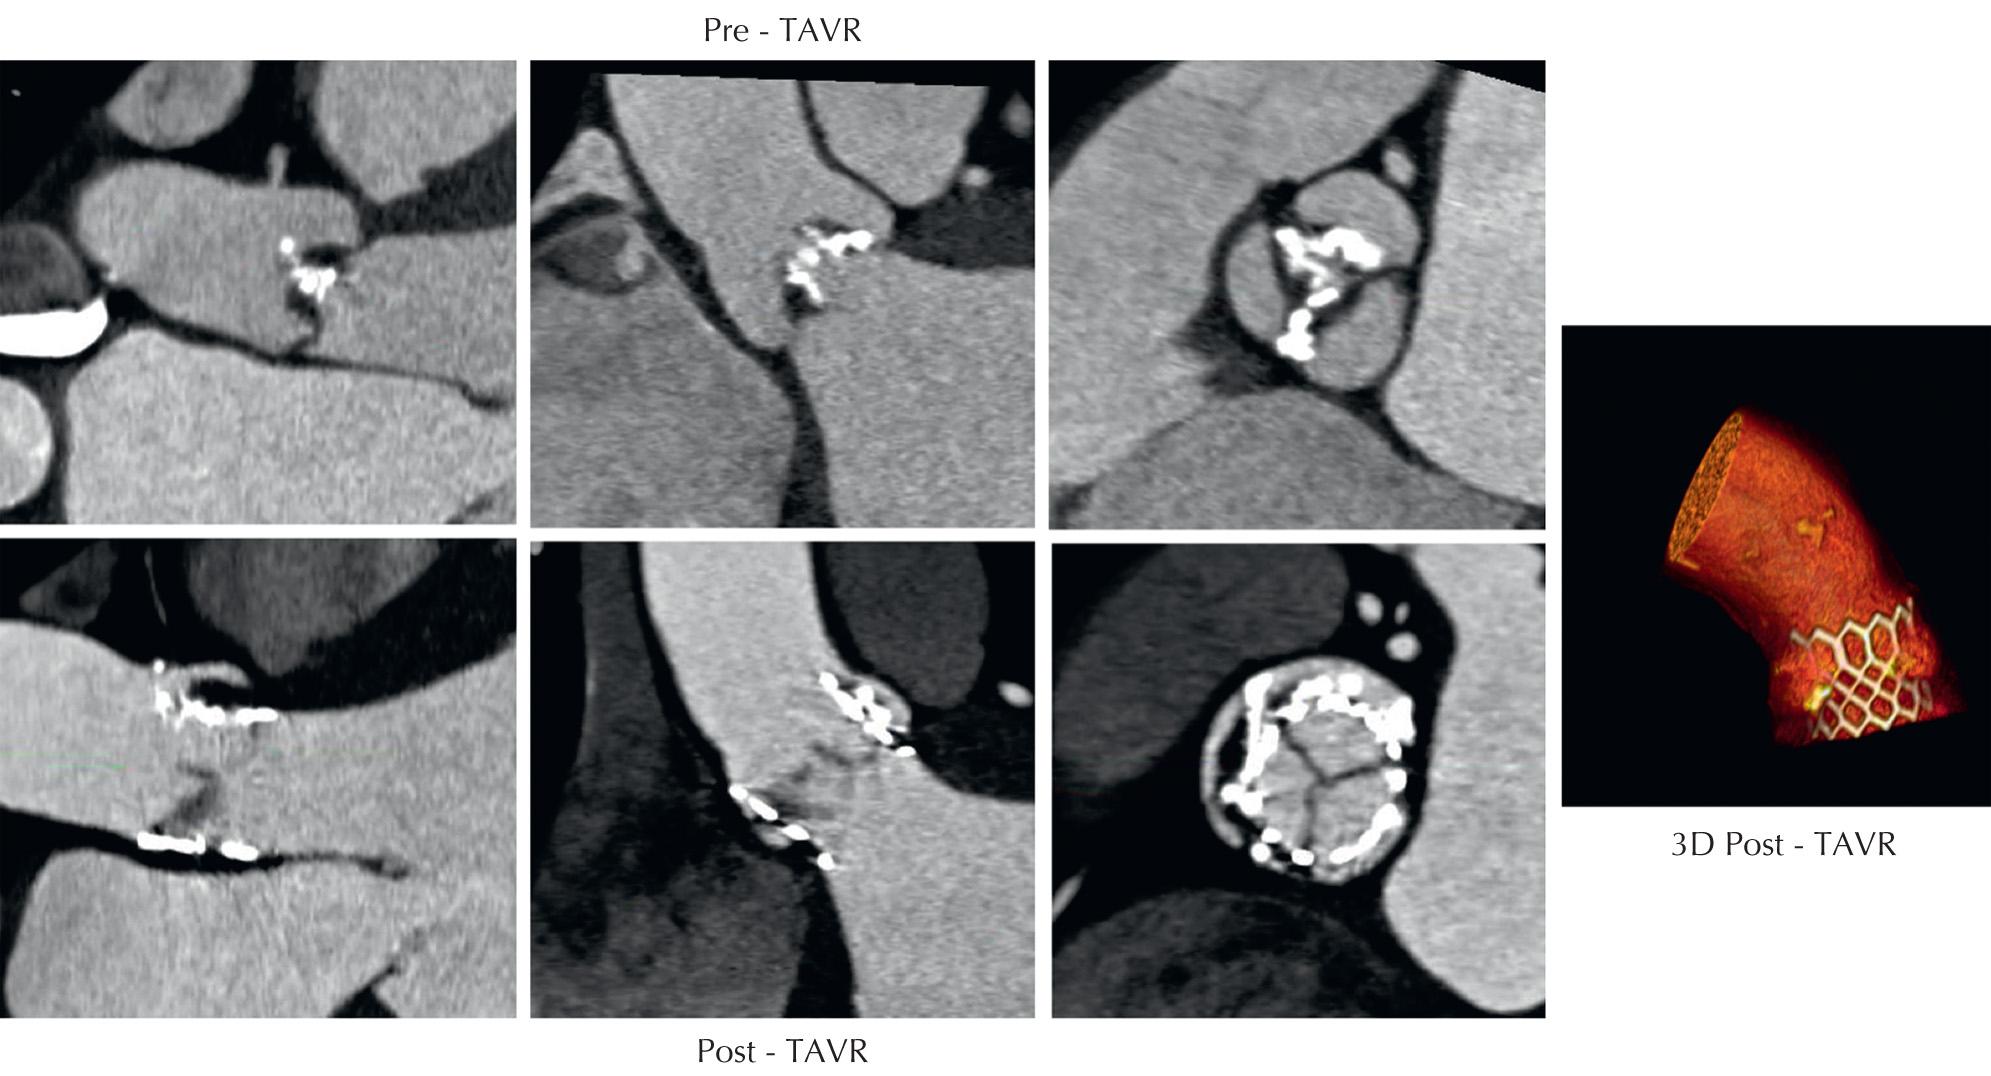 FIG 11.4, Cardiac CT images pretranscatheter and posttranscatheter aortic valve replacement (TAVR). 3D , Three-dimensional.